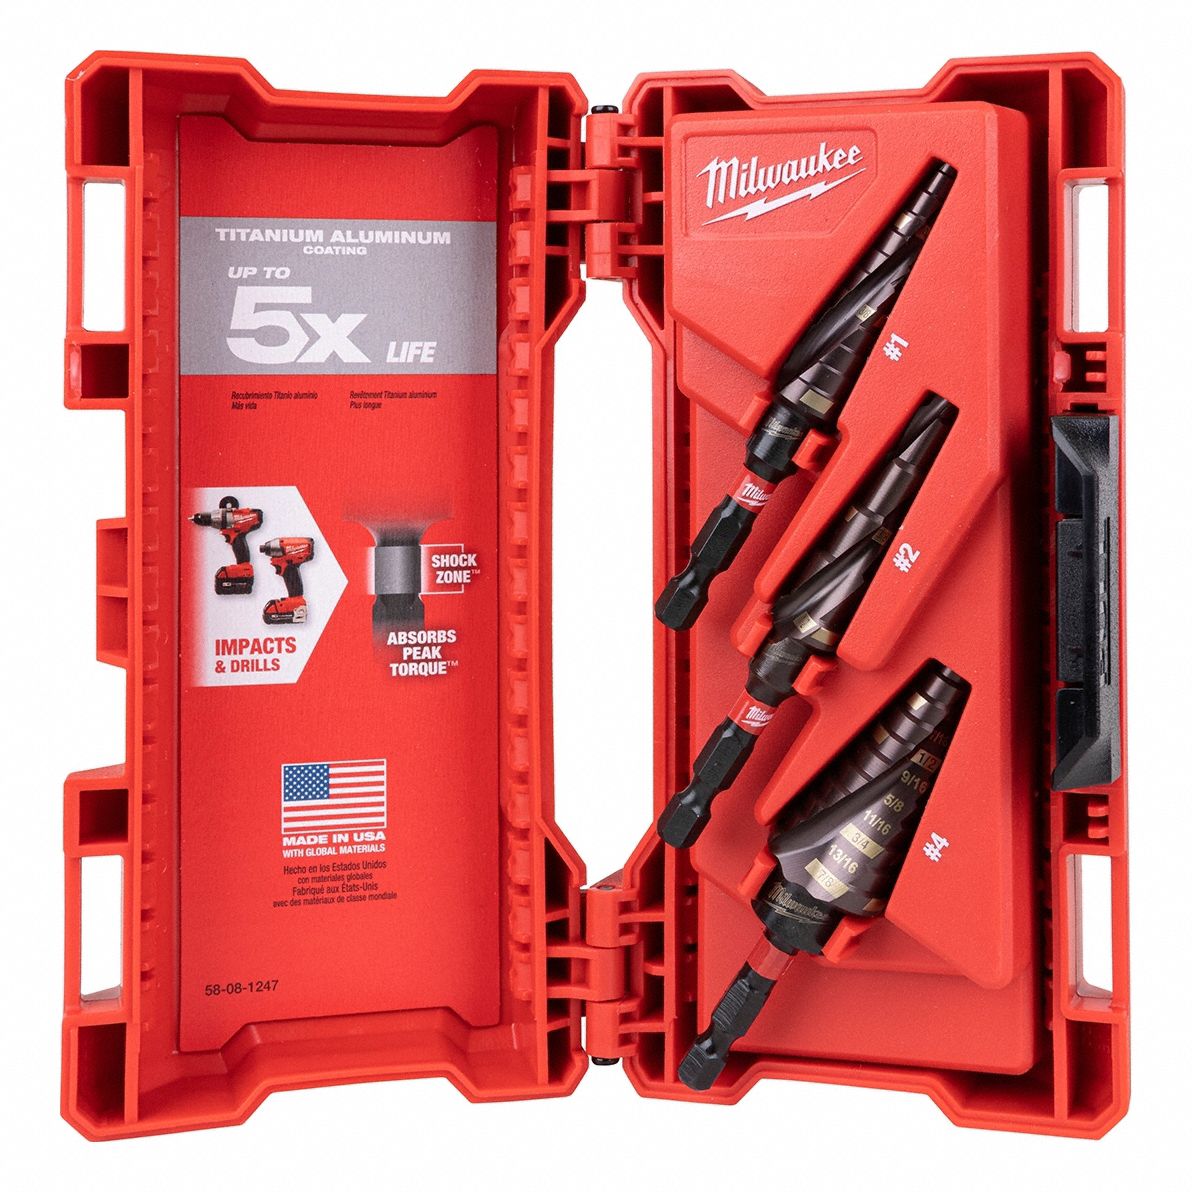 MILWAUKEE Step Drill Bit Set: 27 Hole Sizes, 1/8 in to 1 1/8 in, 1/16 in  Step Increments, Hex Shank